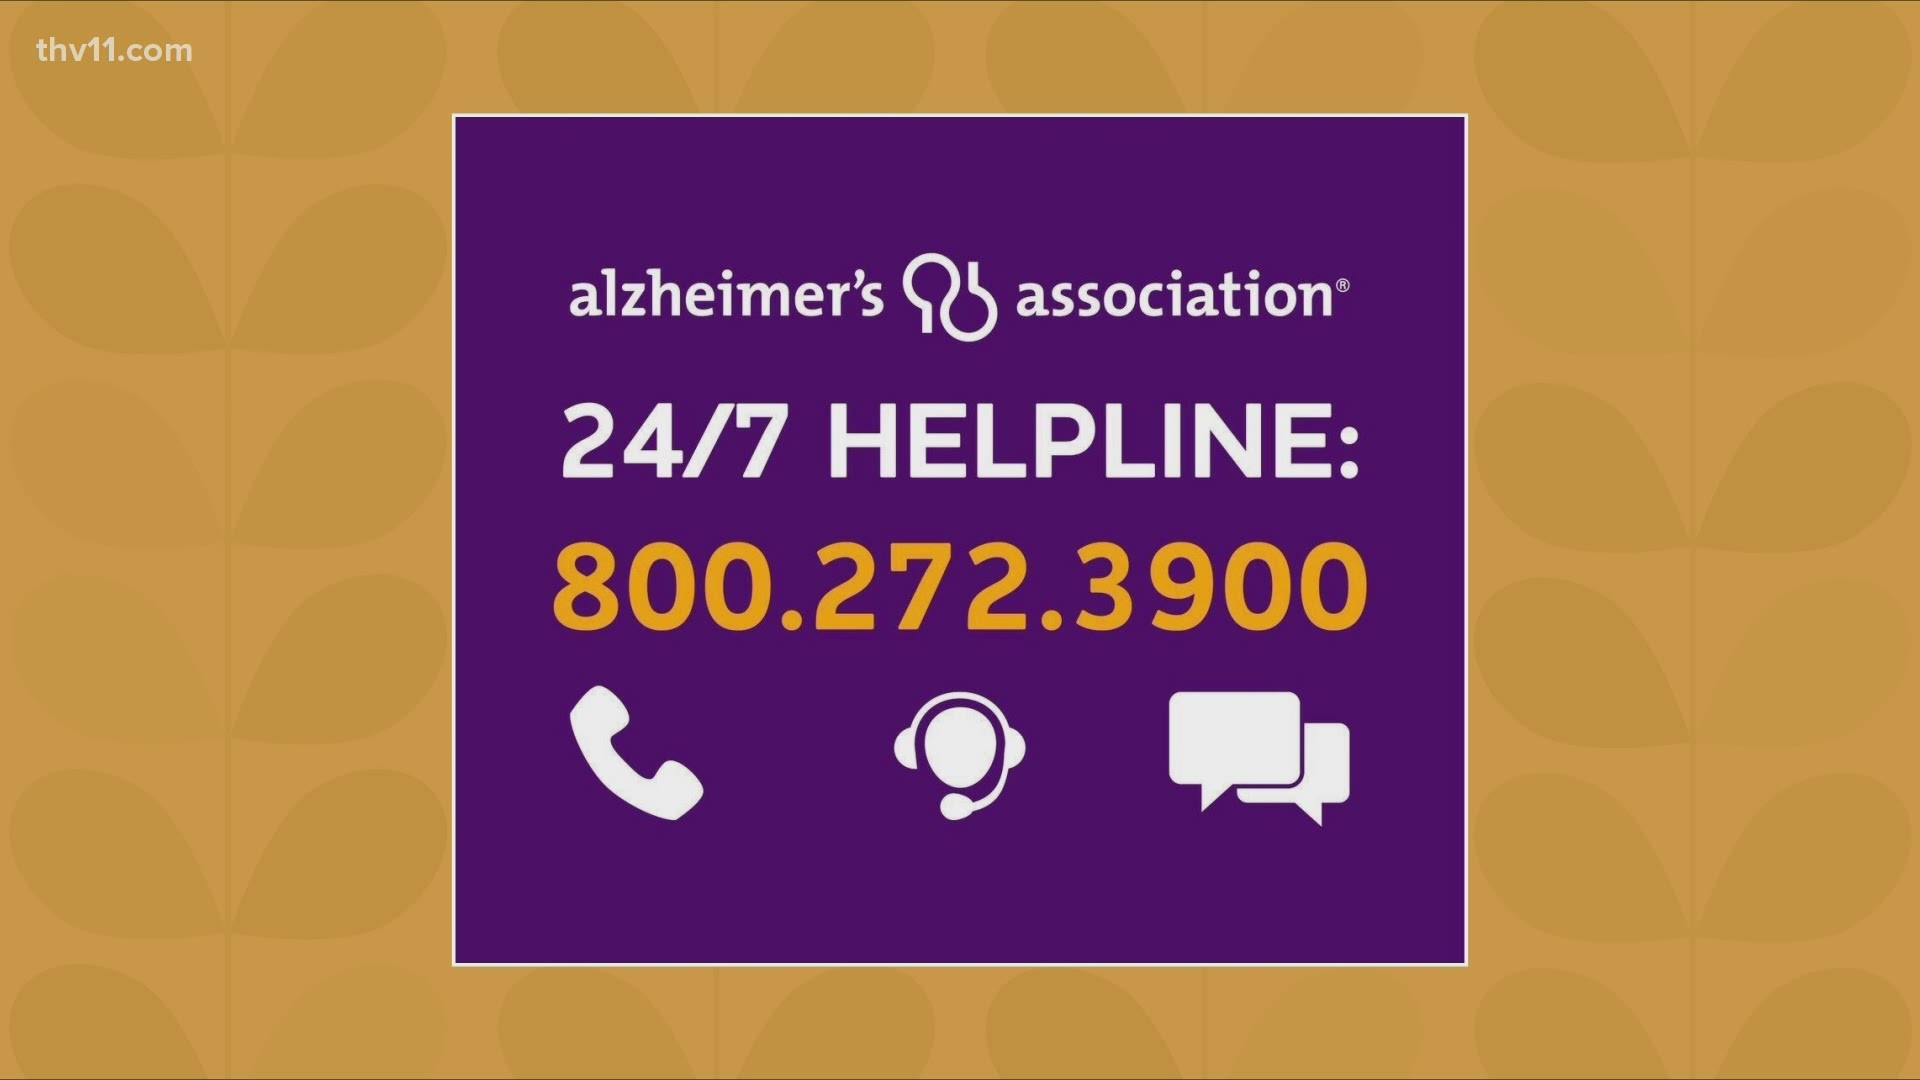 Executive Director of Alzheimer's Association Arkansas Chapter Kirsten Dickins shares early signs of Alzheimer's or other dementia to look out for in your loved one.